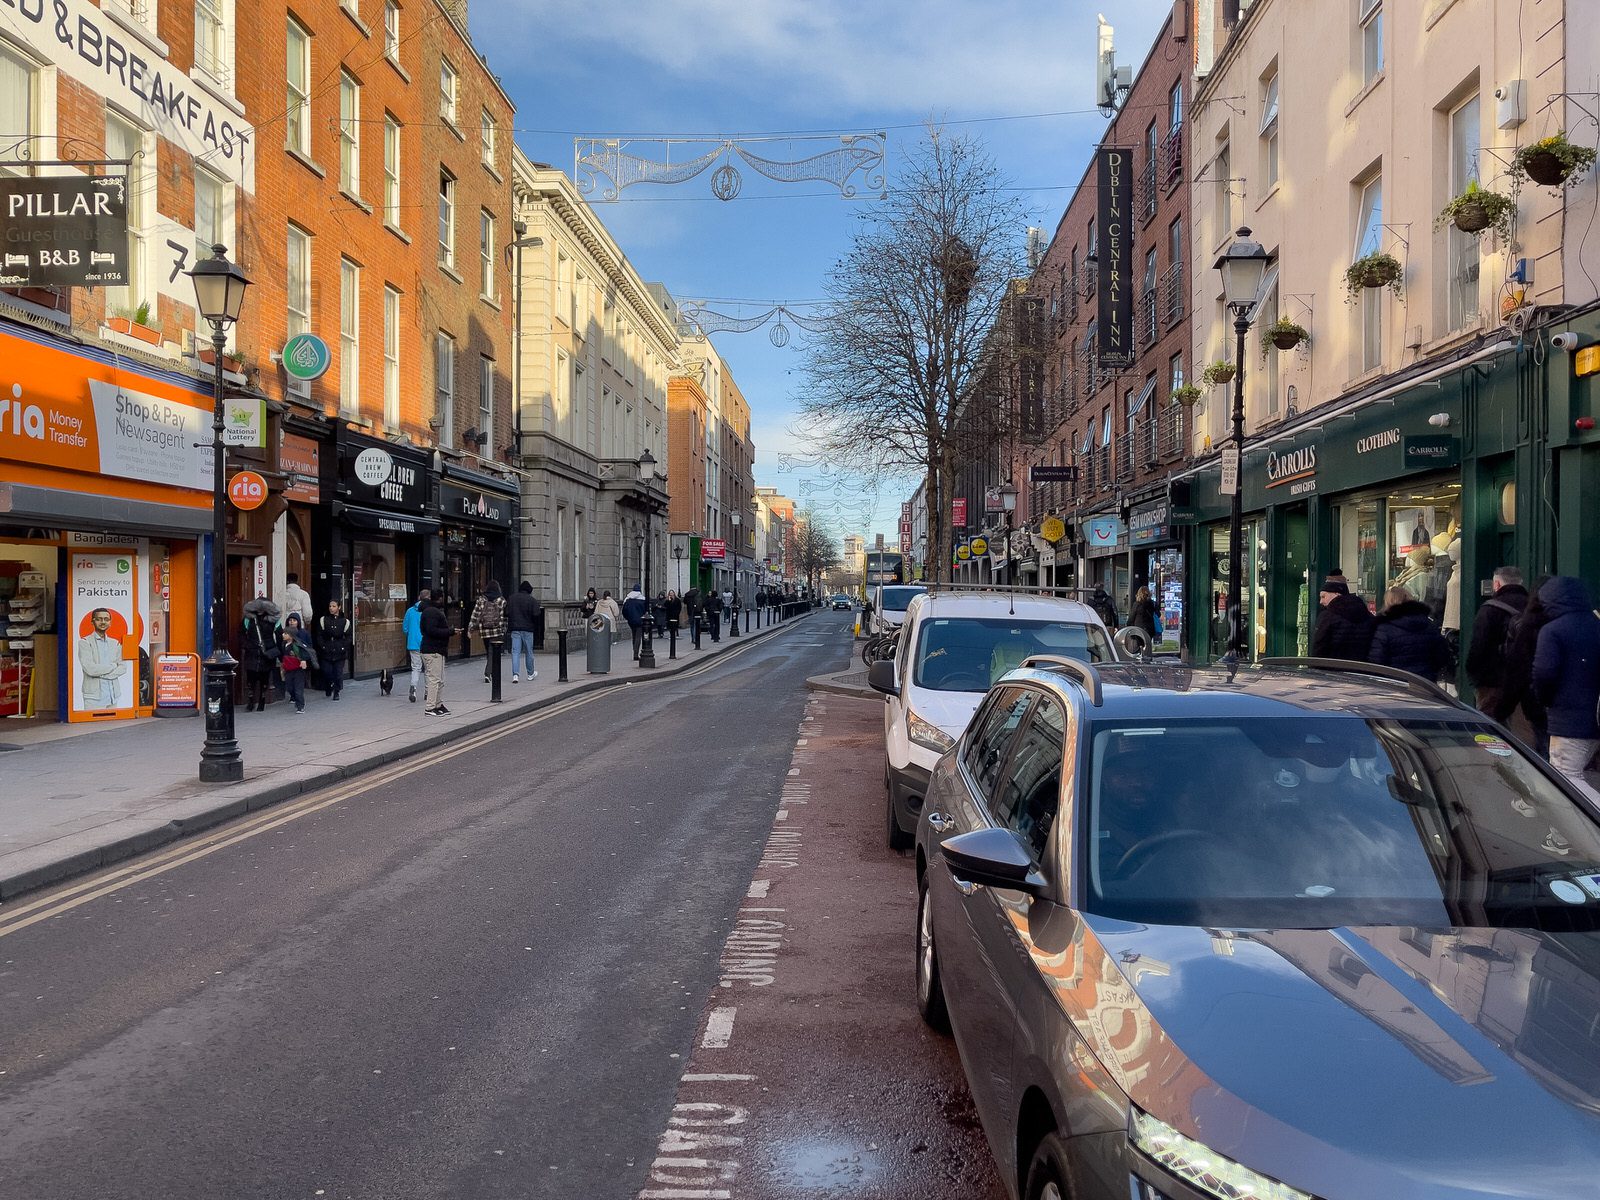 TALBOT STREET [FAILS TO MEET ITS POTENTIAL AS A MAJOR SHOPPING STREET]-225719-1